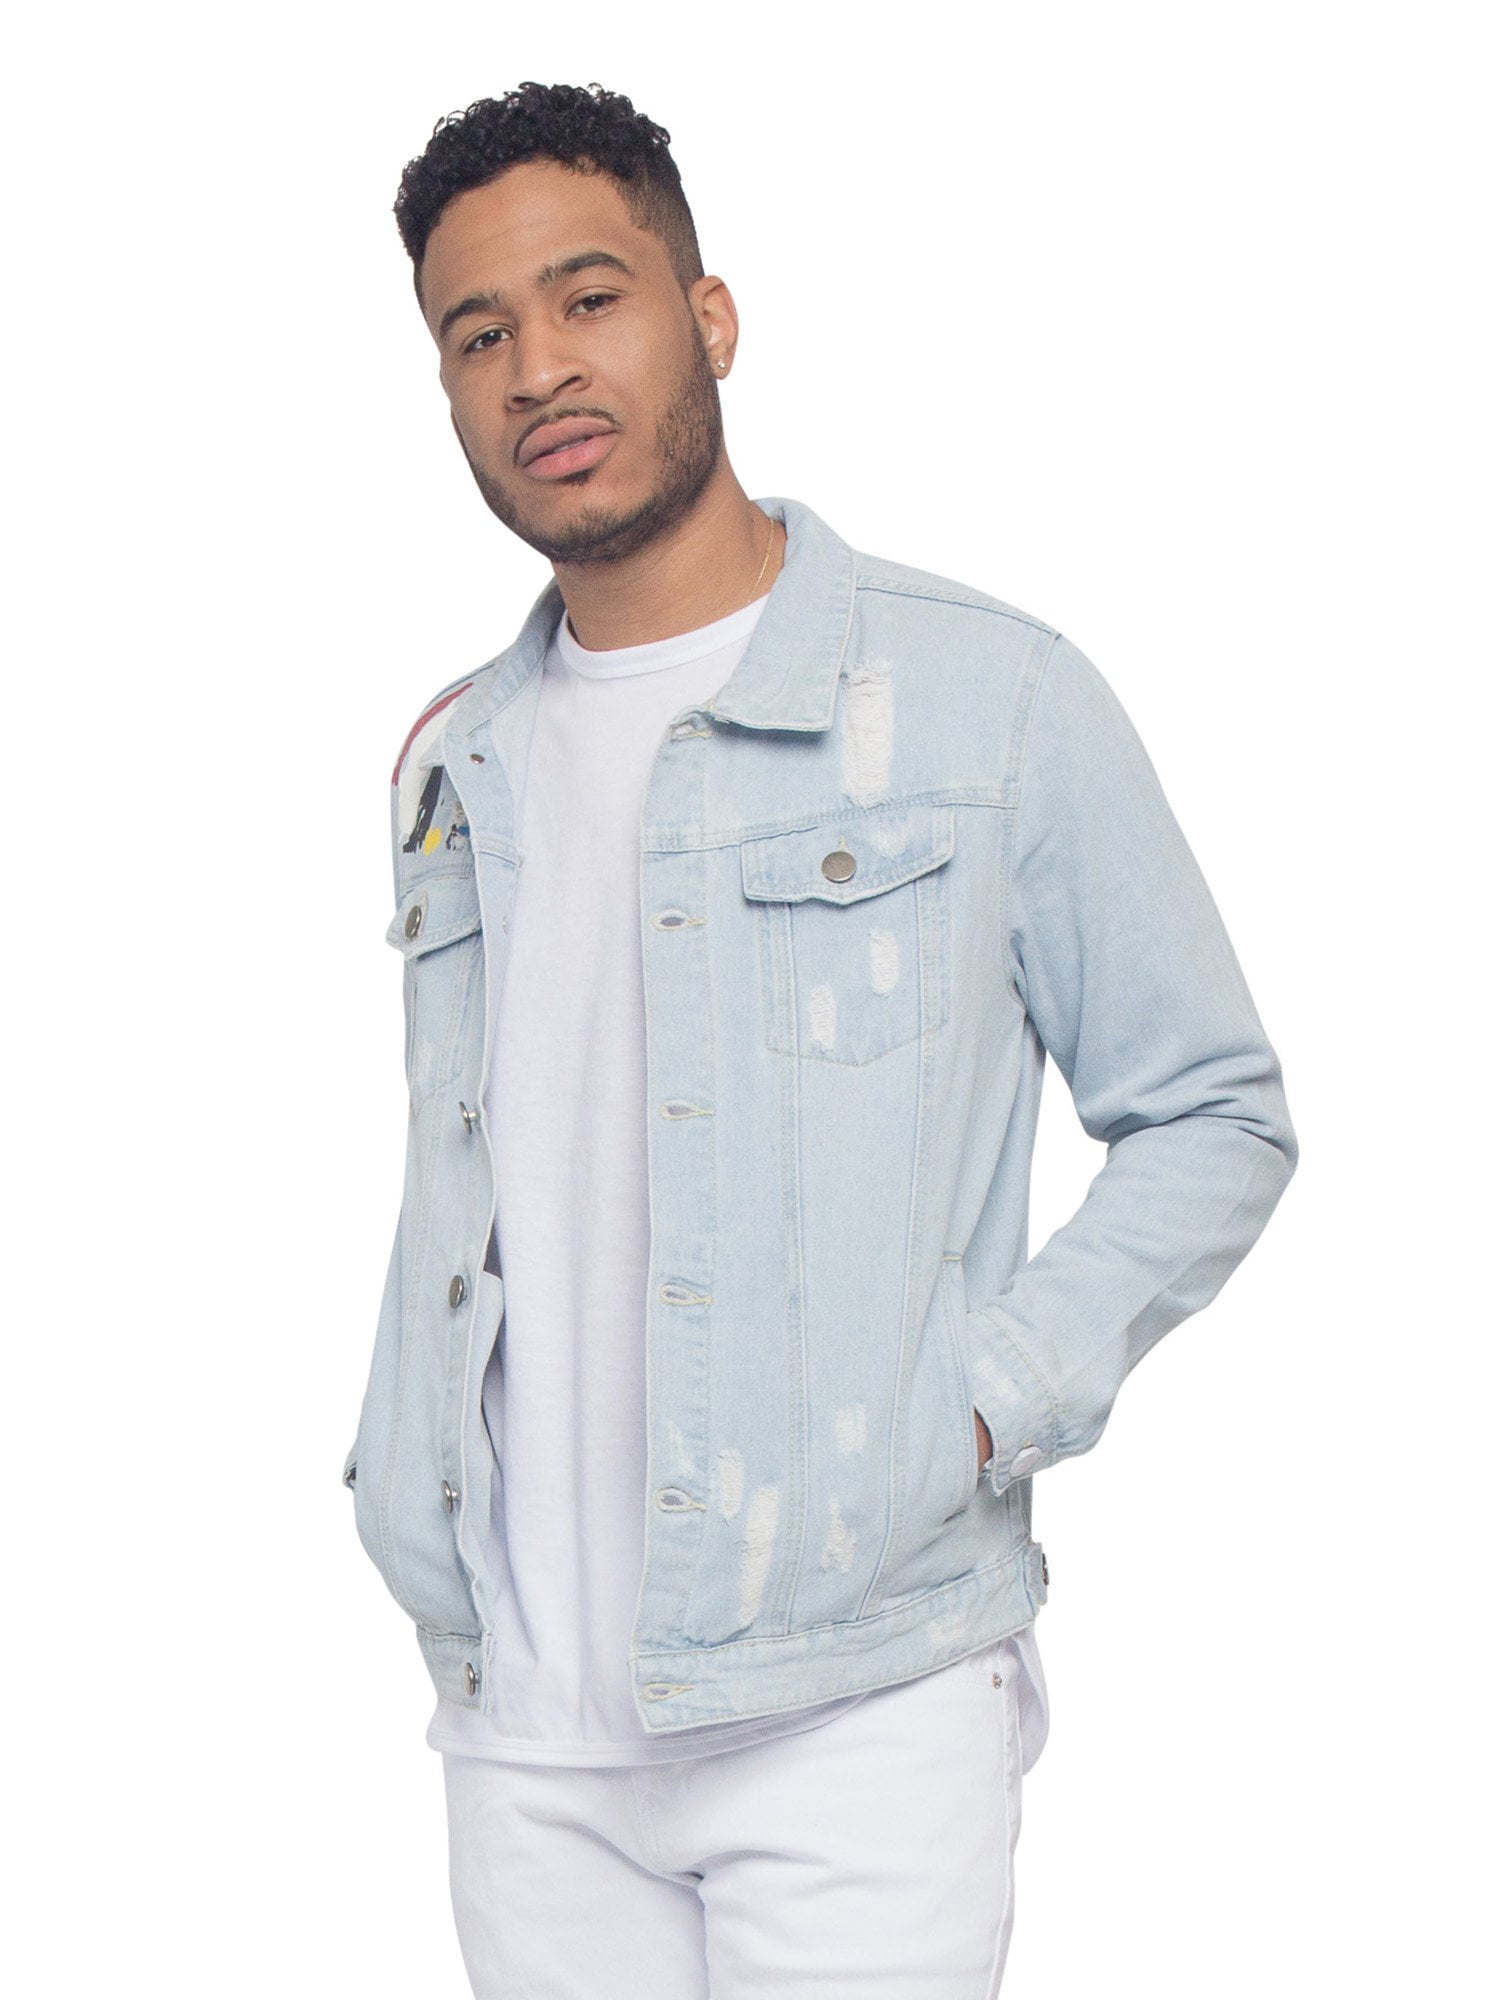 G-Style USA Victorious Men's Casual Distressed Jean Jacket